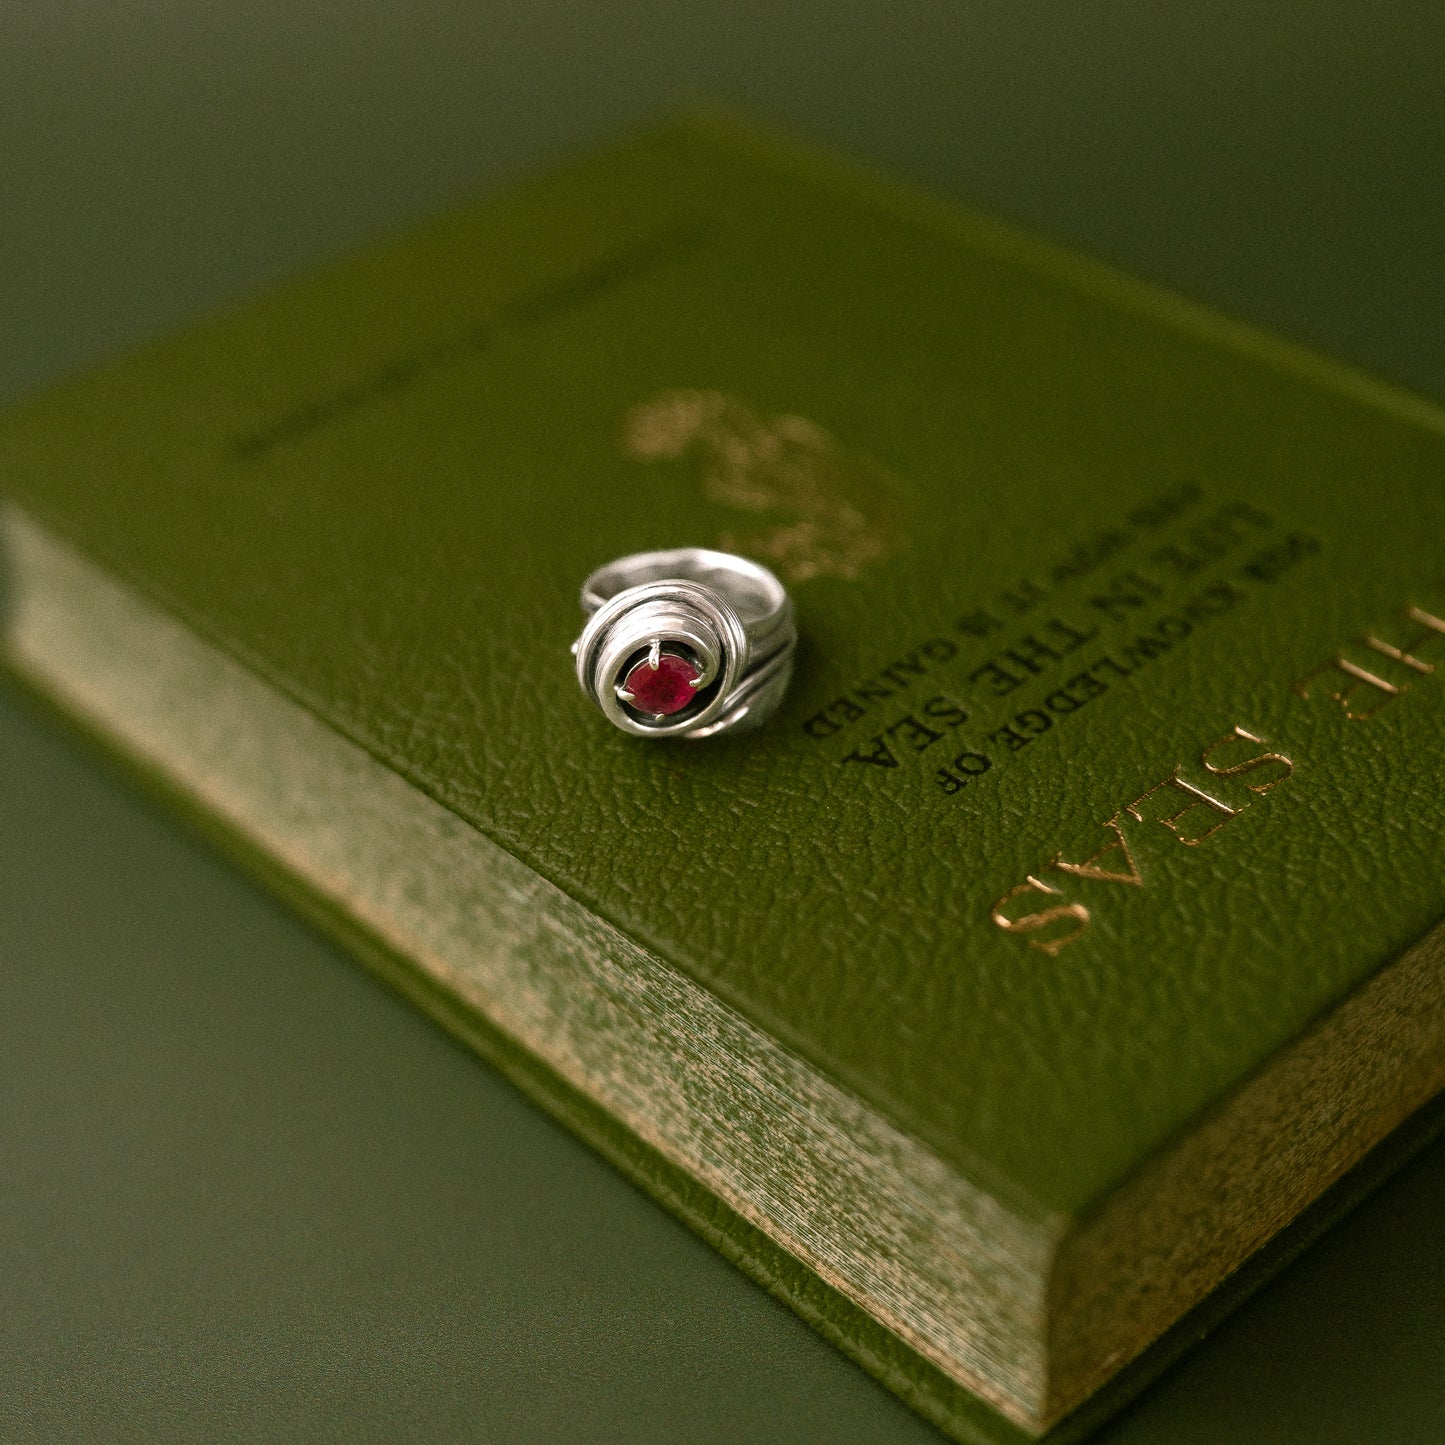 One of a Kind Drift Sterling Silver Ring with Ruby - Size N